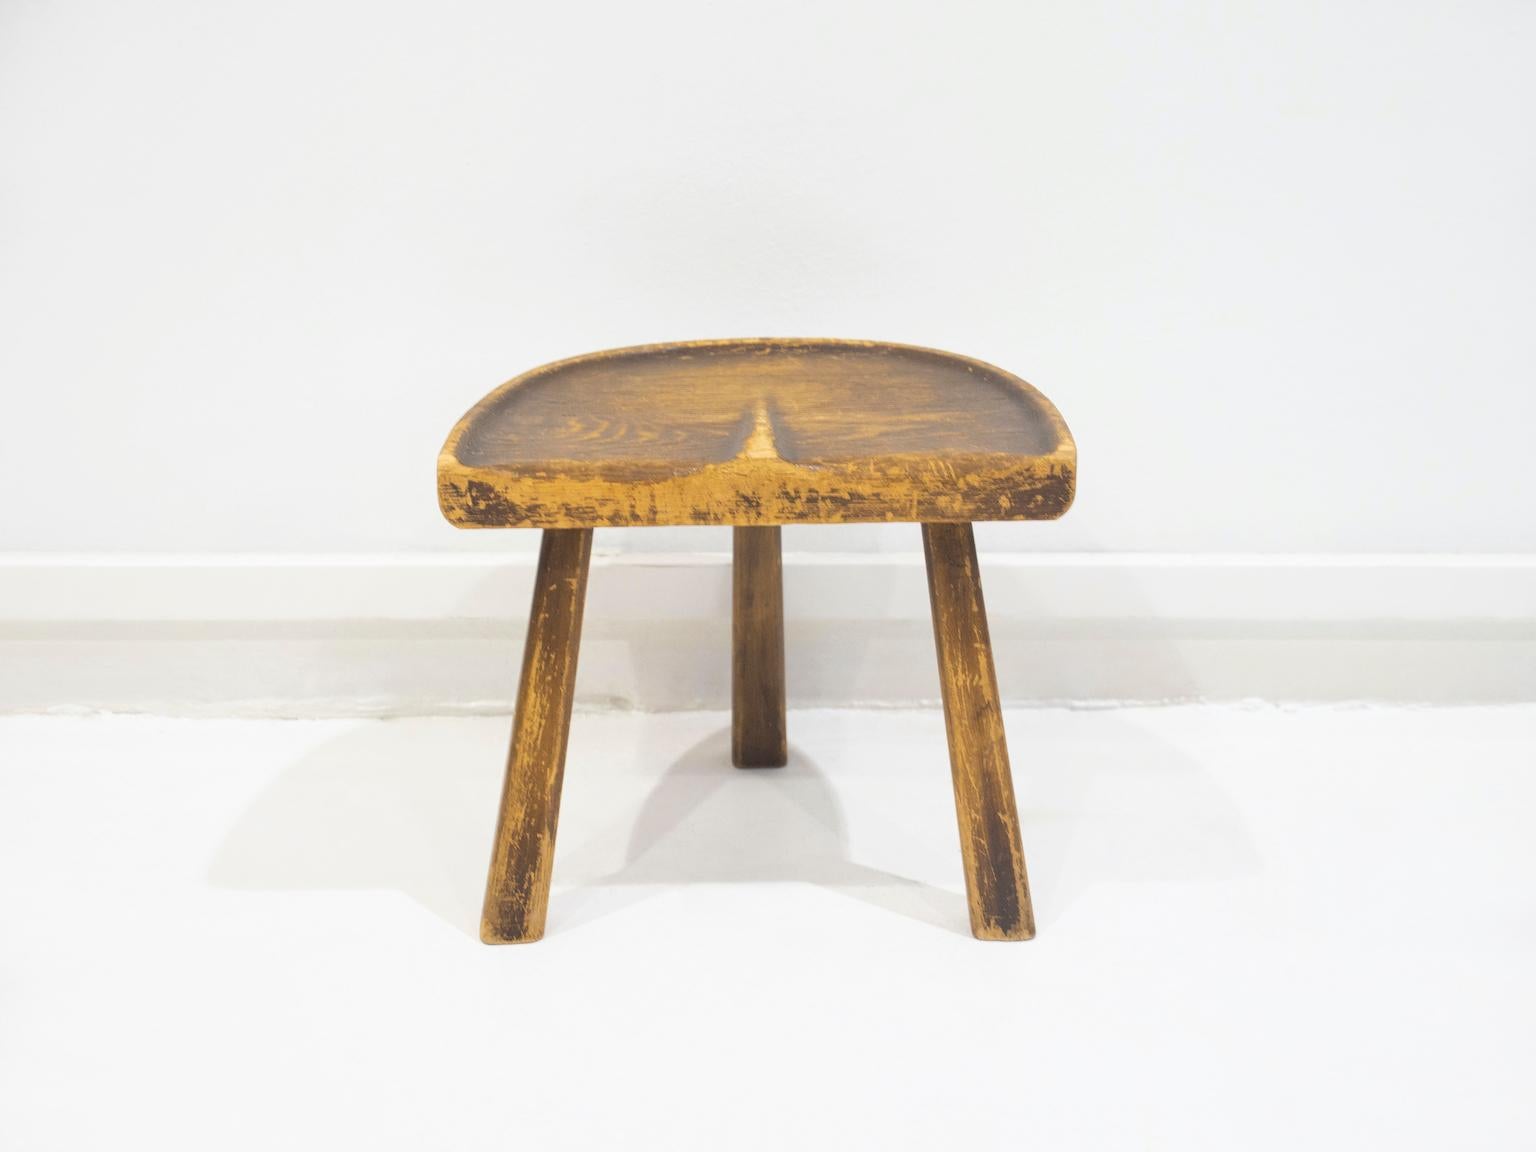 Vintage wooden stool made in France in the 1950's. The stool has an ergonomic seat and three legs, resembling a simple milk stool. Ideal to decorate rustic areas.